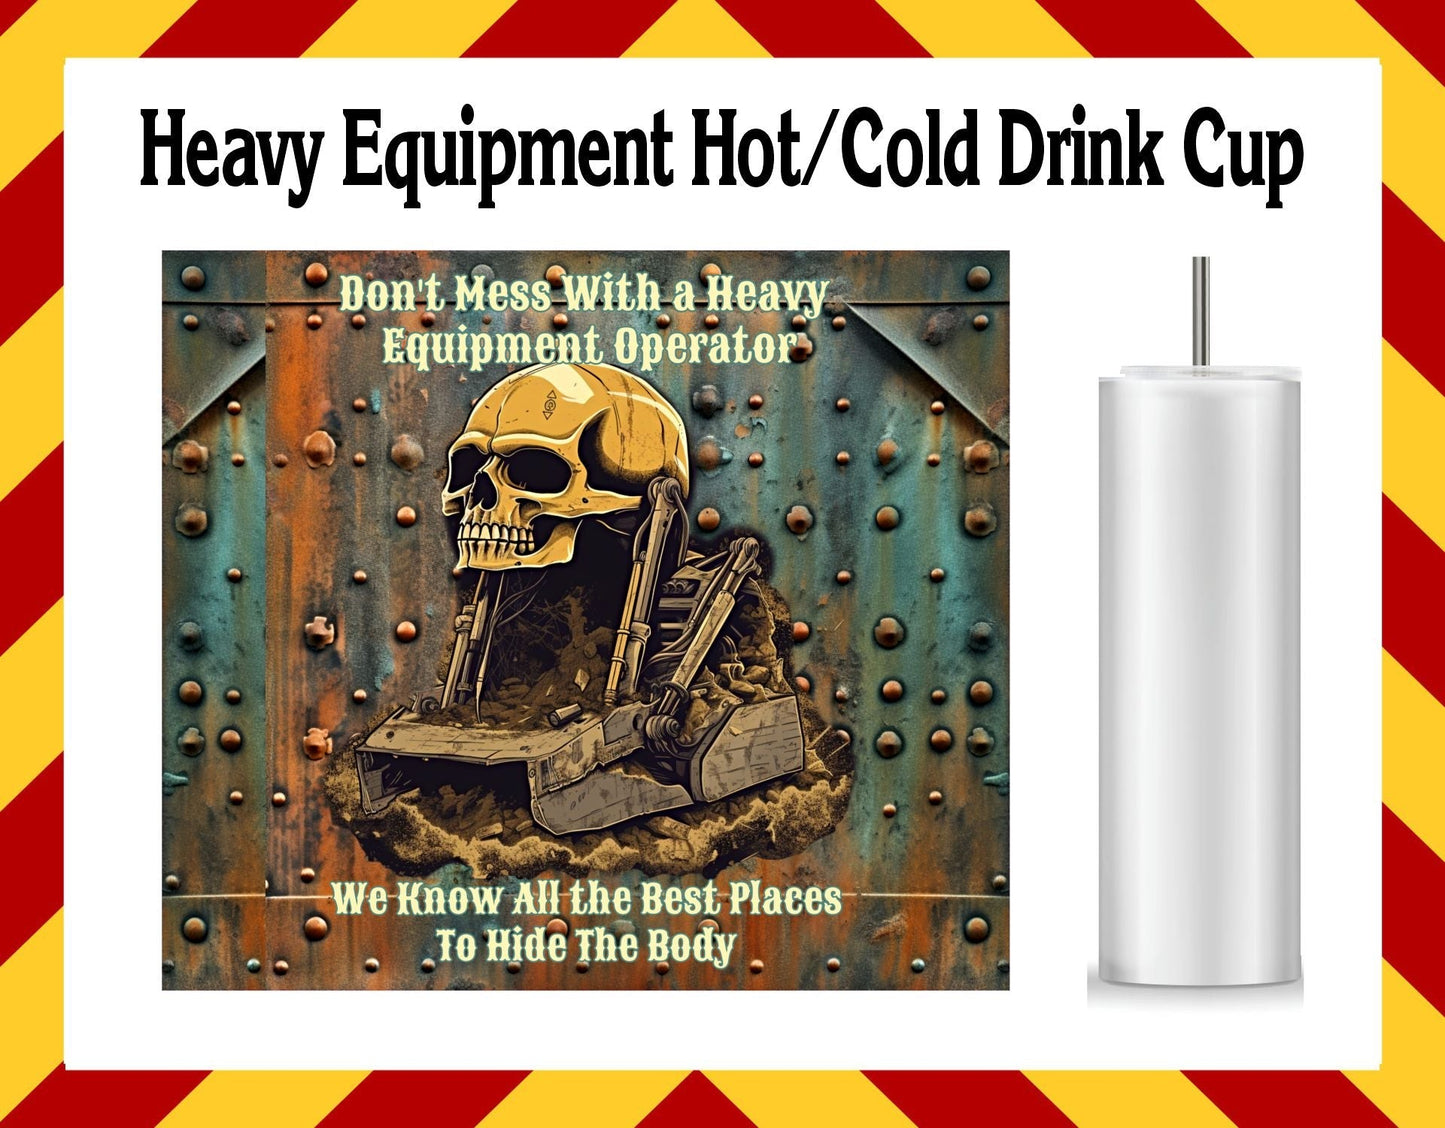 Stainless Steel Cup - Heavy Equipment Operator Design Hot/Cold Cup